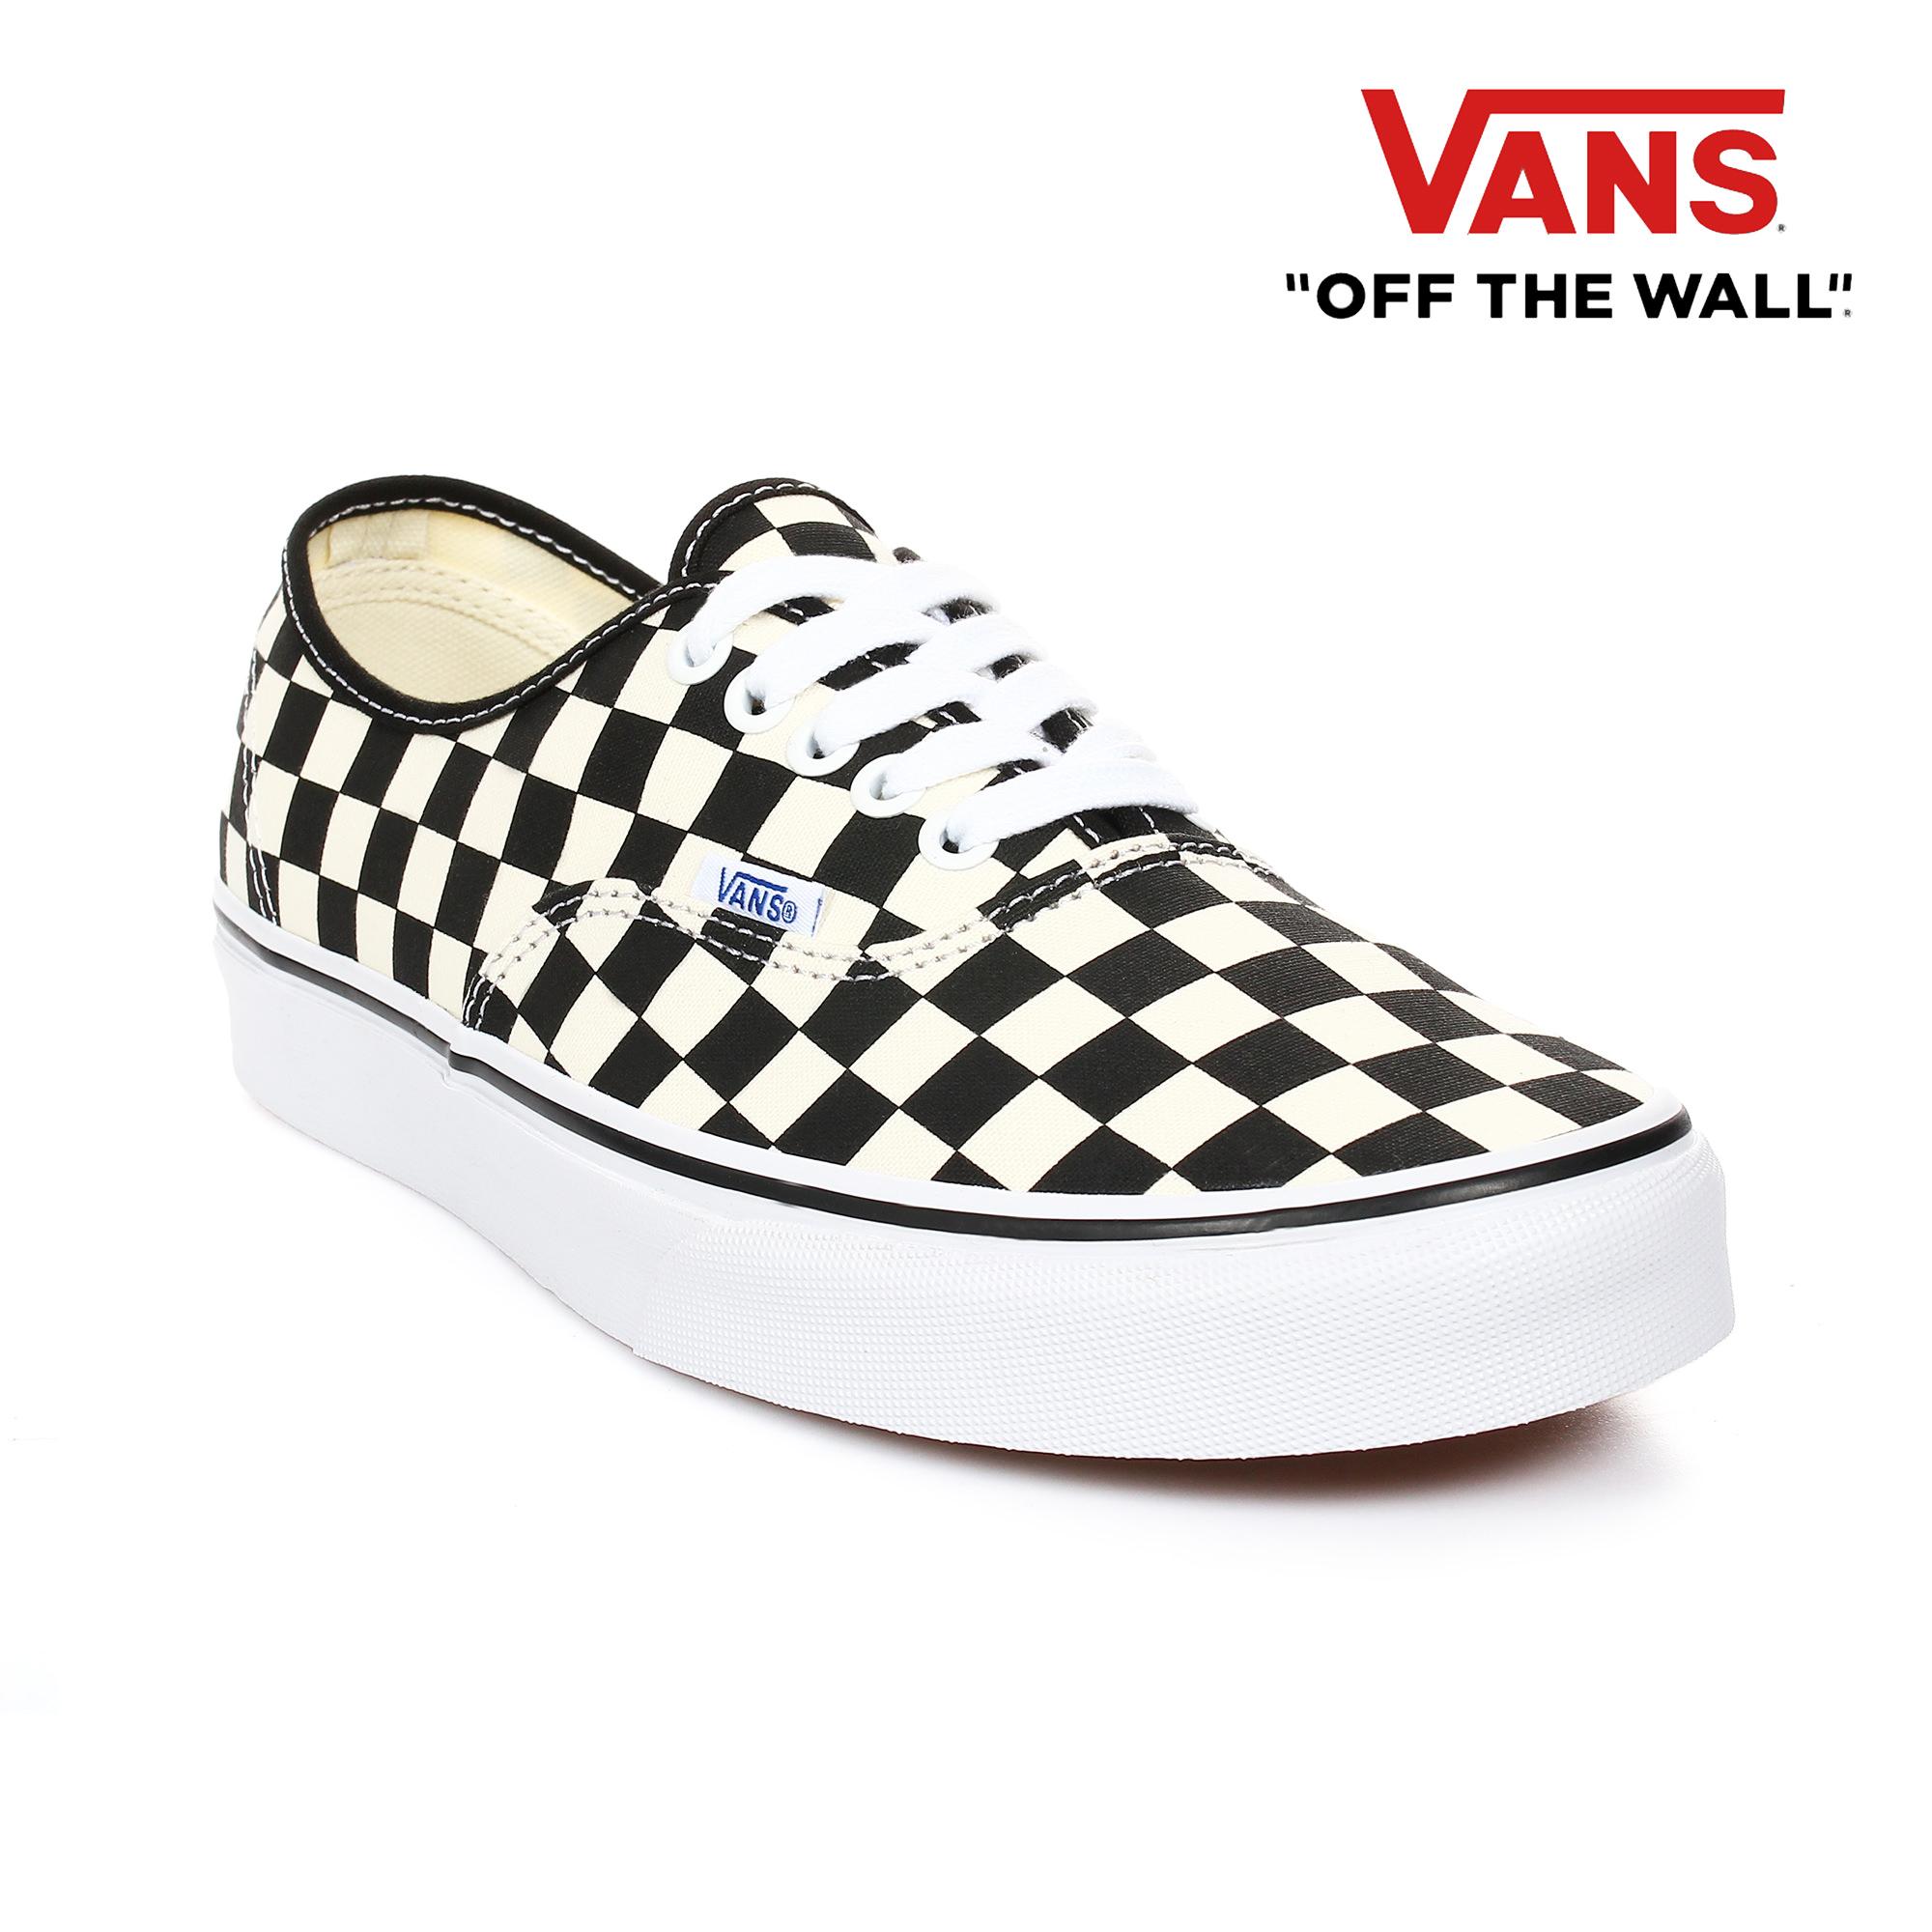 what is the price of vans shoes